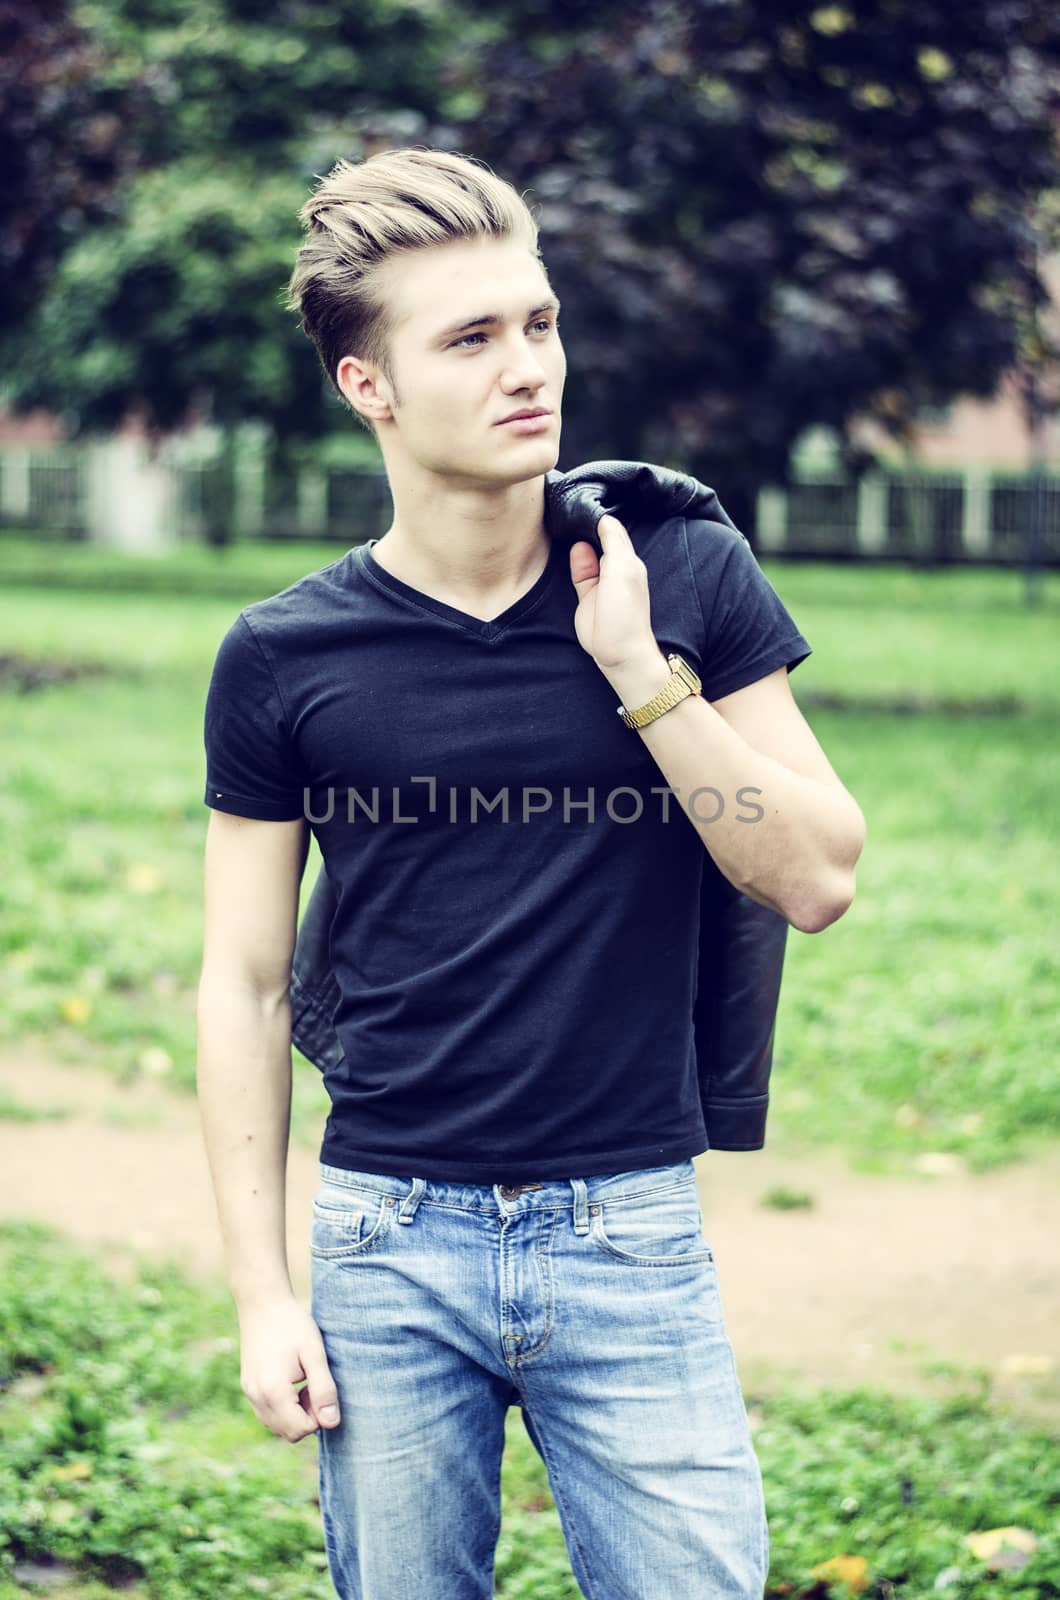 Attractive young man standing in city environment, with rucksack on one shoulder